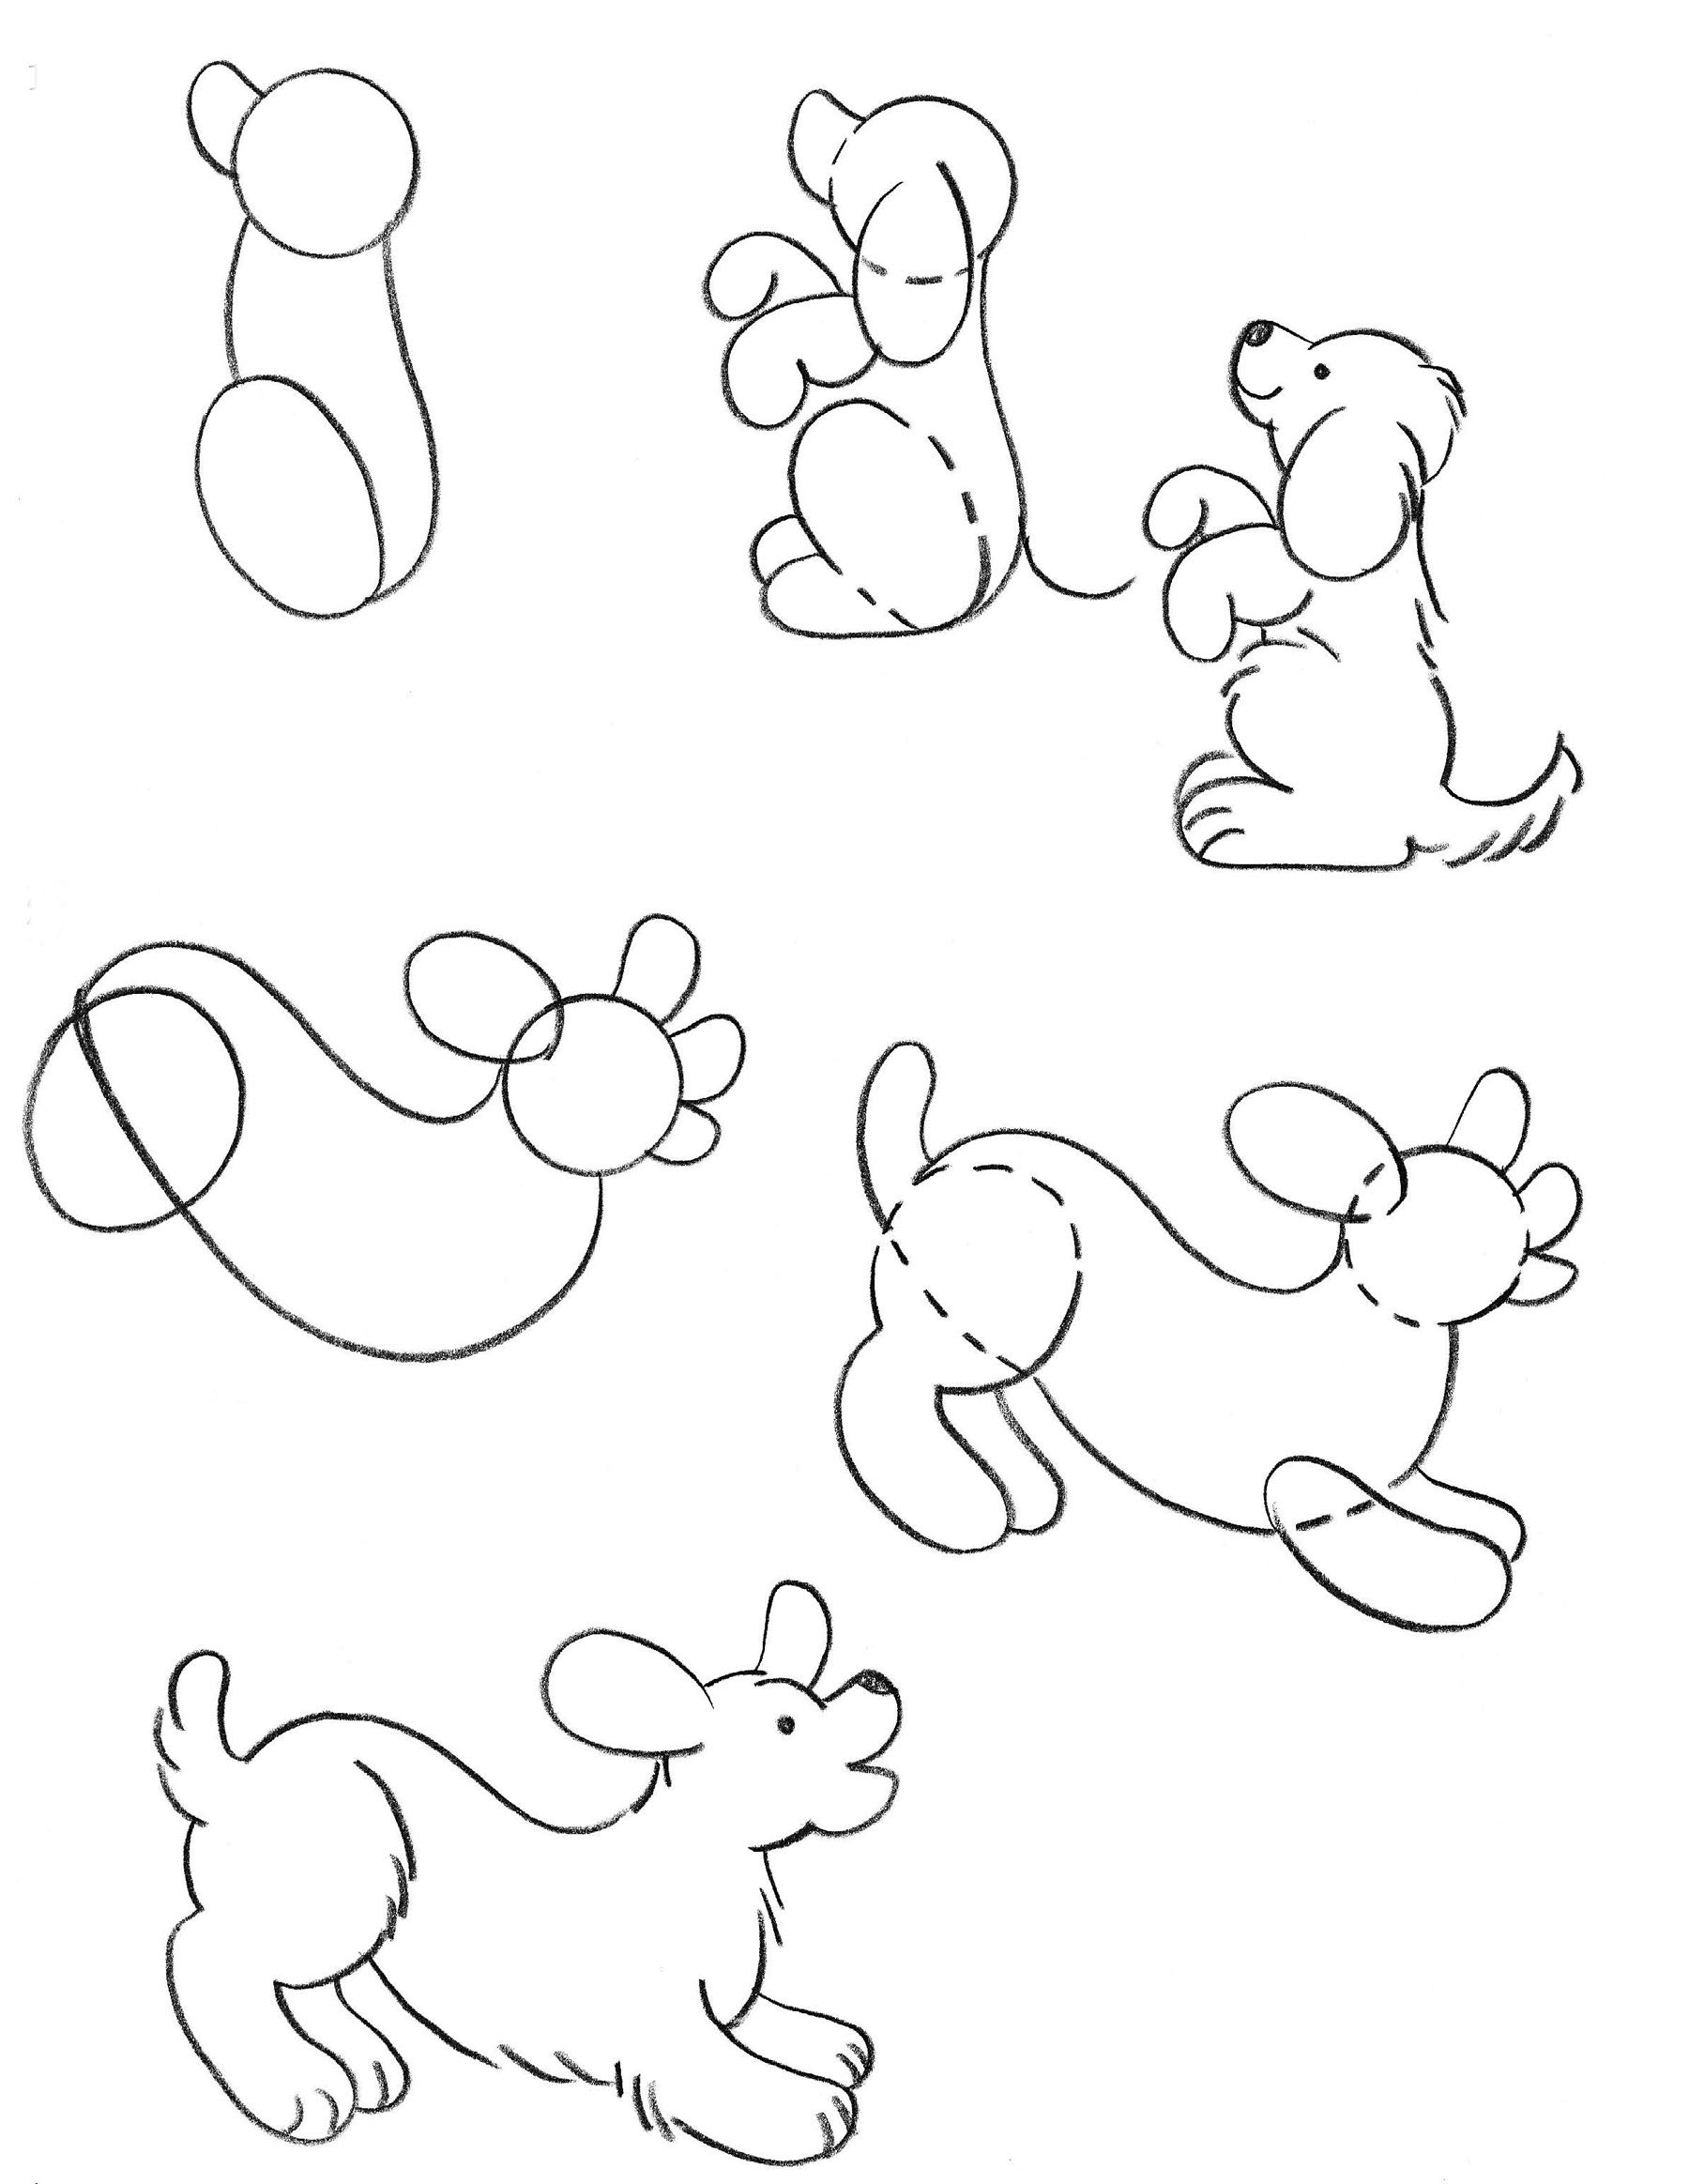 How to Draw Pets: Step-by-Step Drawings! (Dover How to Draw)